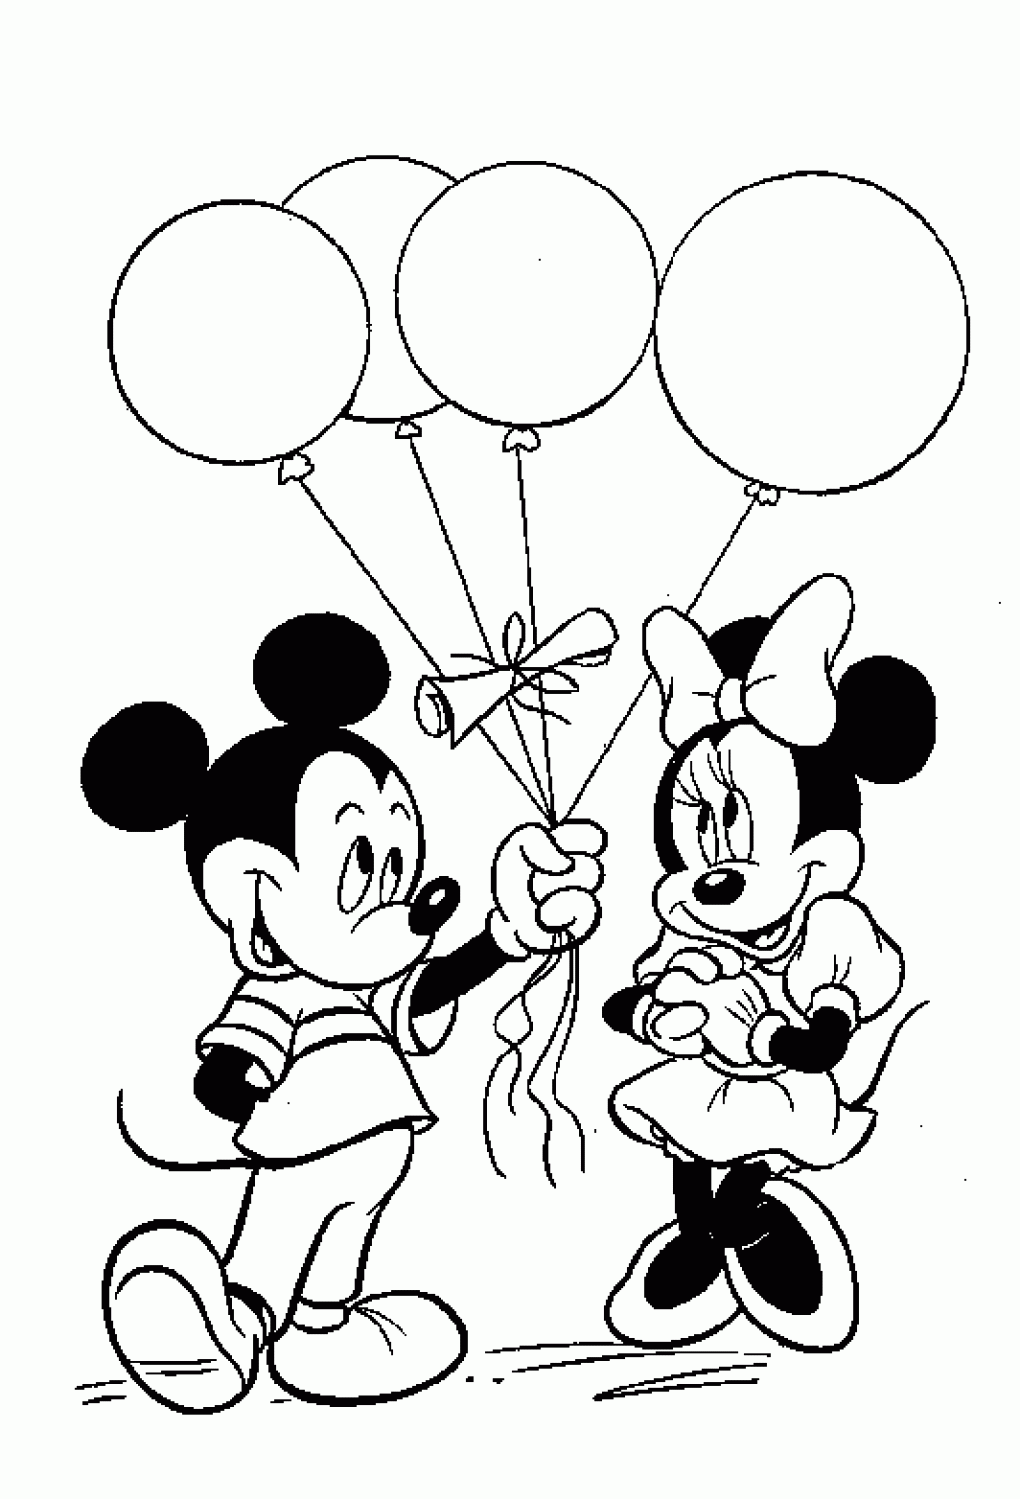 Amazing of Awesome Printable Coloring Pages Of Mickey Mou #409